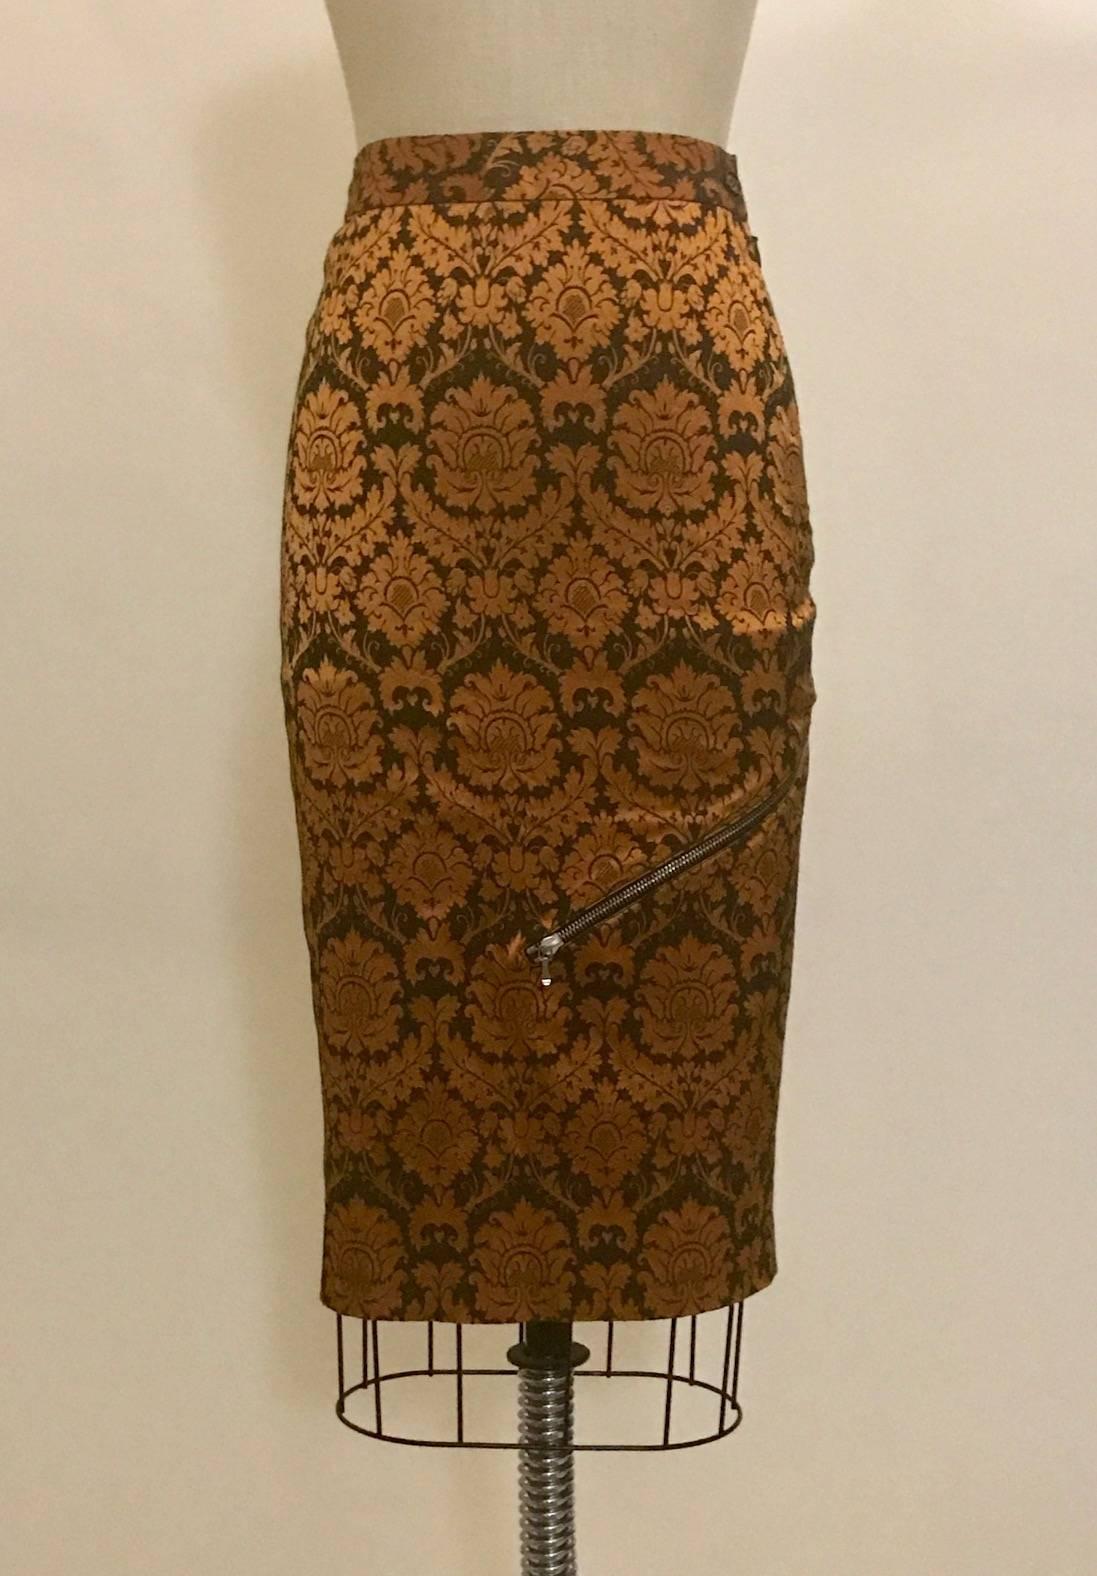 Alexander McQueen orange and brown brocade pencil skirt, shown in look 18 of the Spring 1997 runway show La Poupee. Working zipper detail wraps from front to back. Side zip and button.

No content label, feels like silk blend.

Labelled size IT 40,